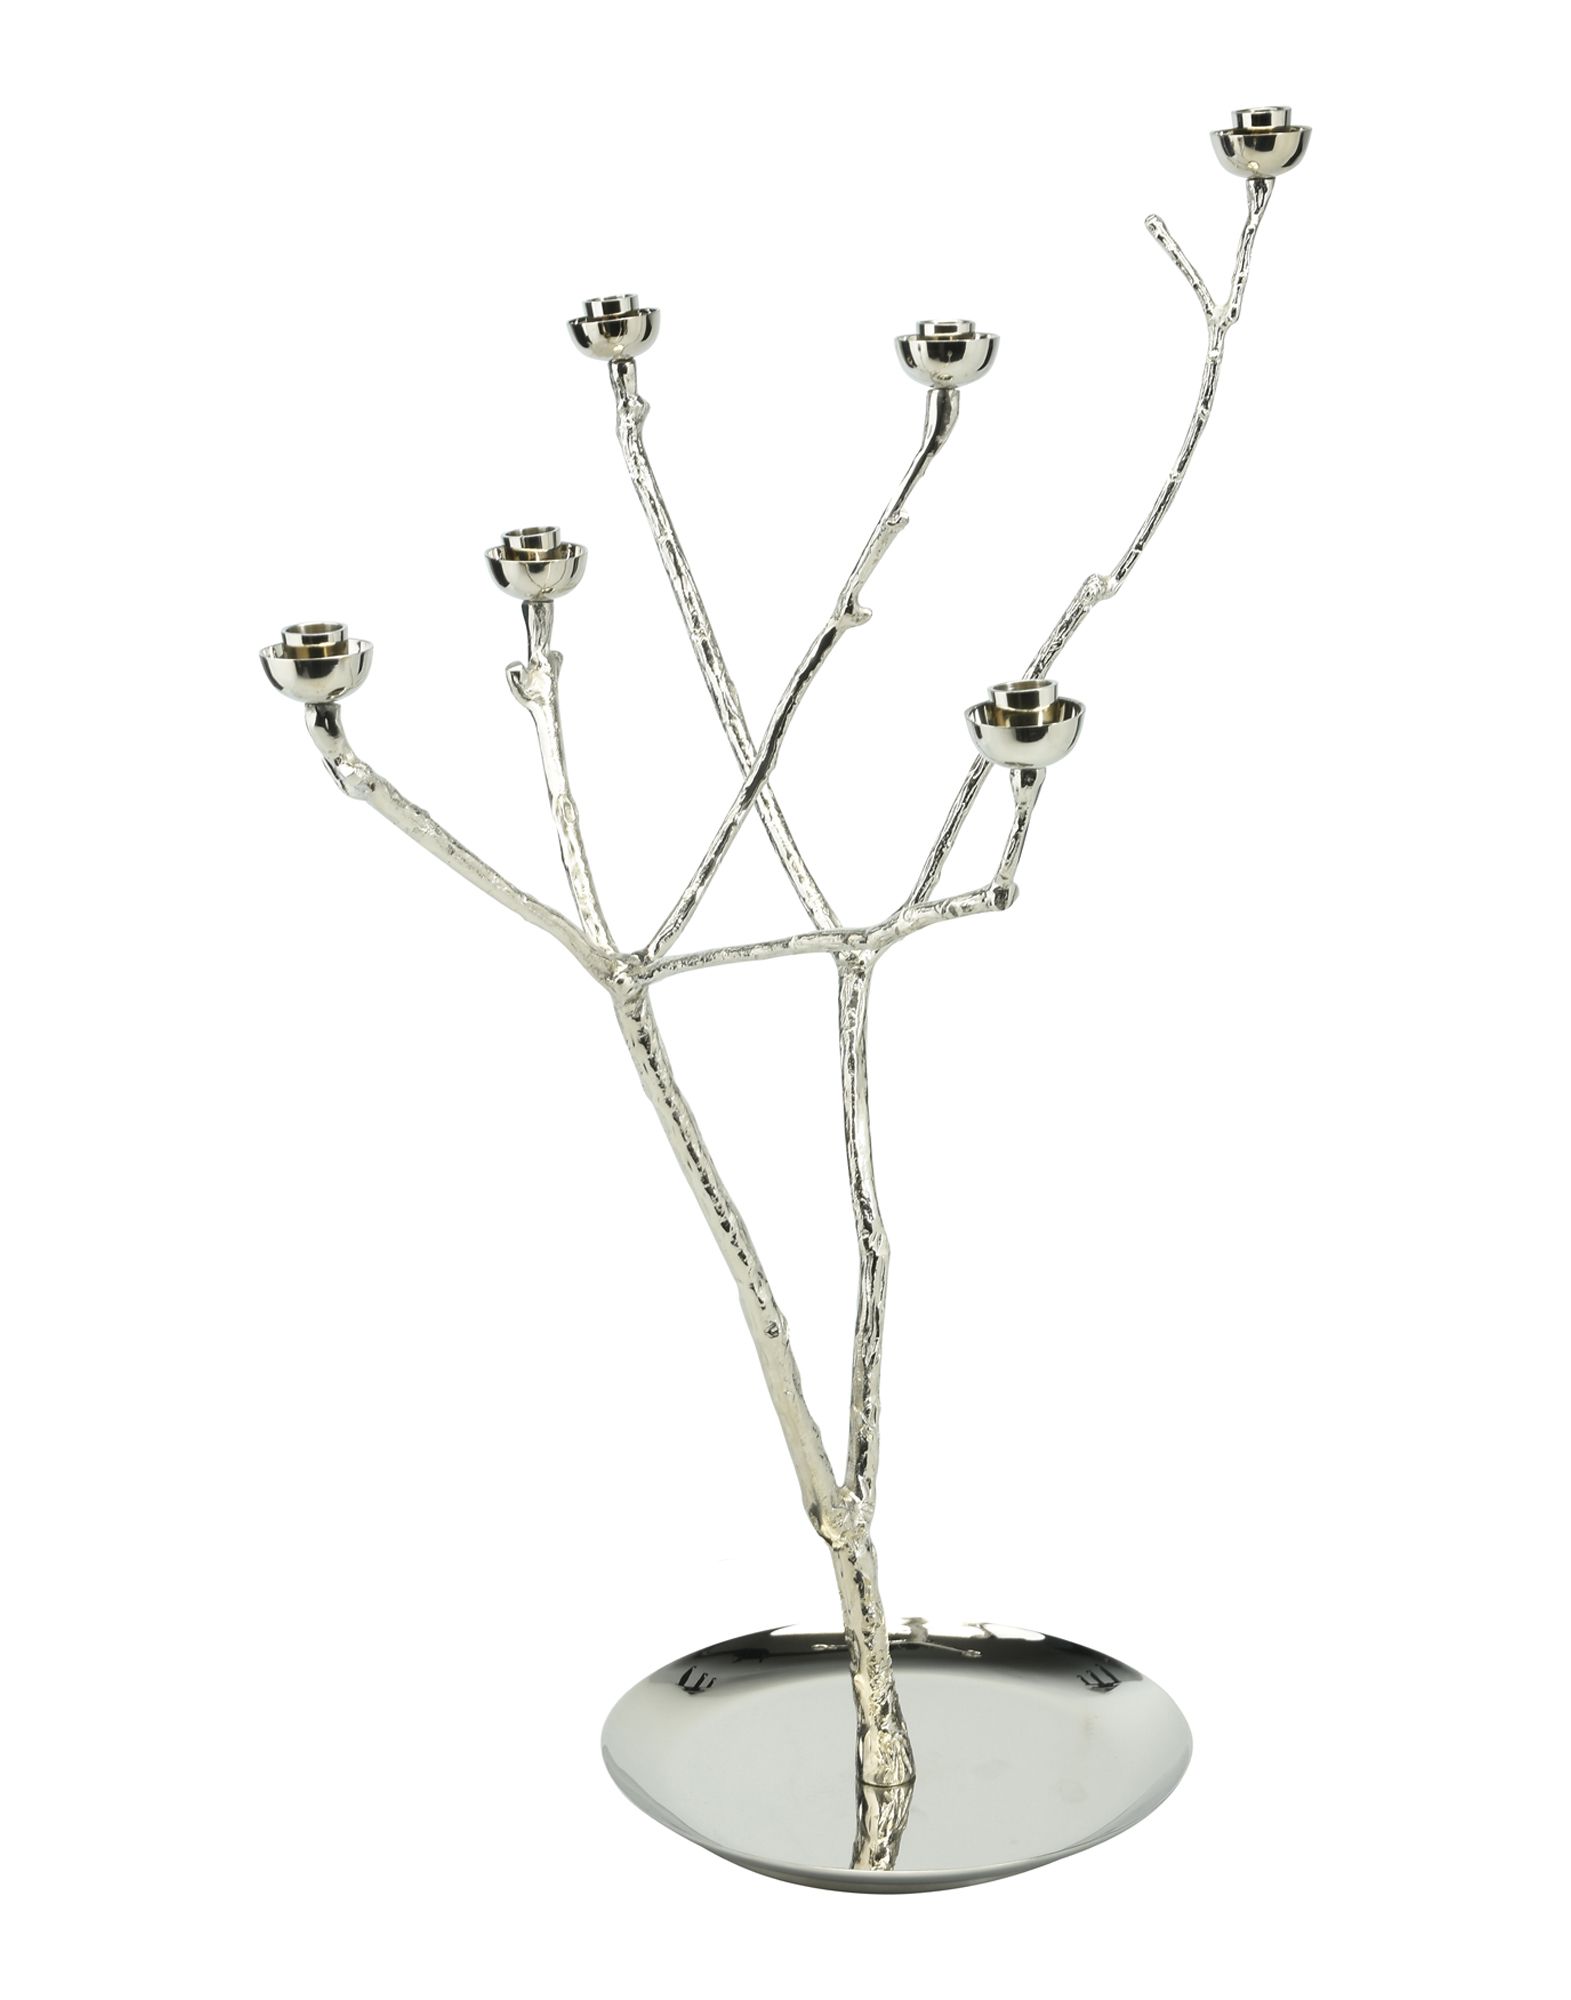 Pols Potten Small Object Candle Holder Branches Ljusstake Inredning